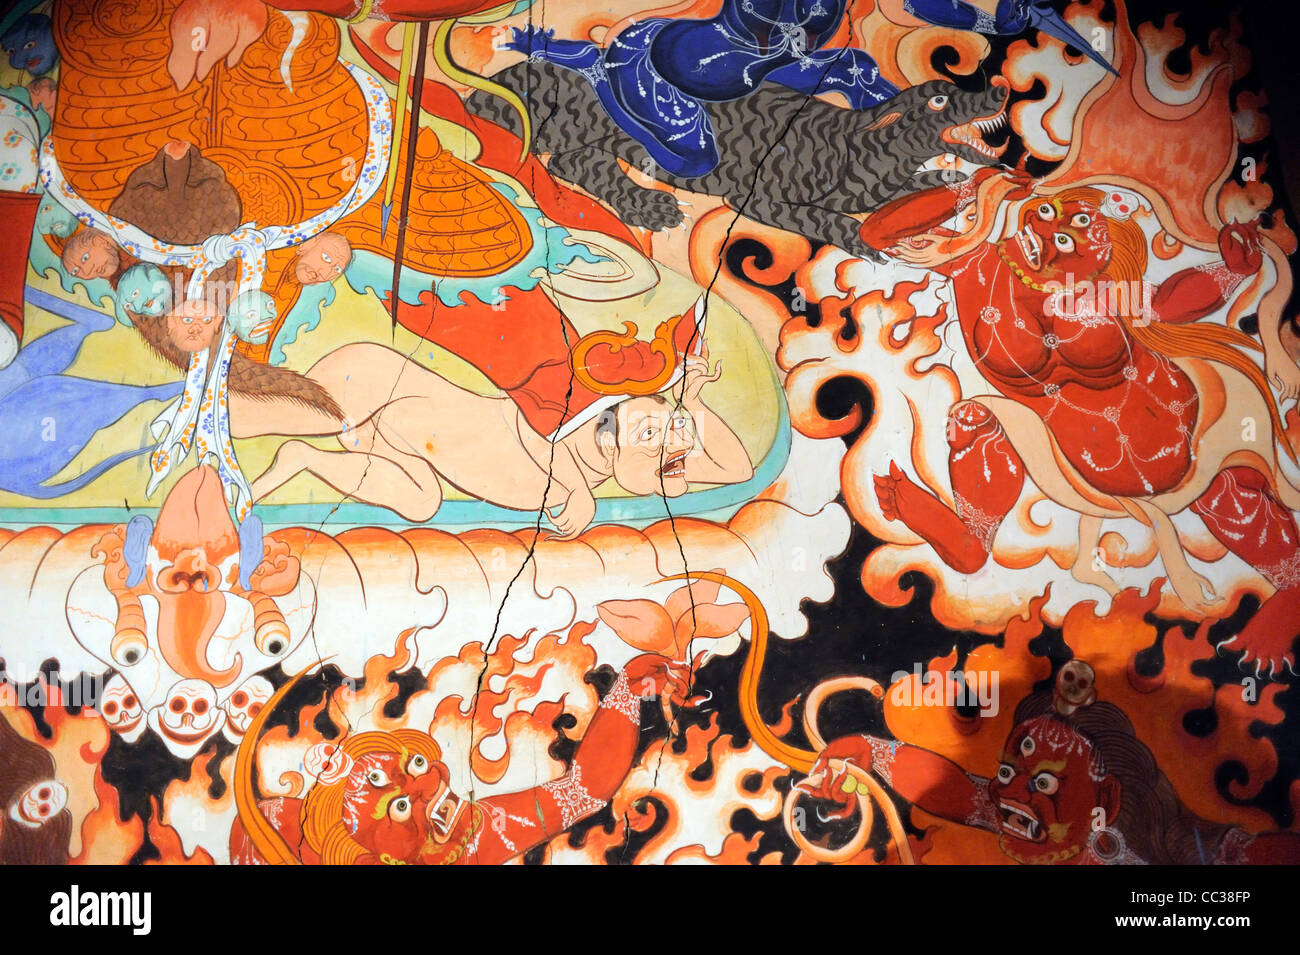 A wall painting in traditional Tibetan buddhist style shows a human under the foot of a wrathful protective being Stock Photo